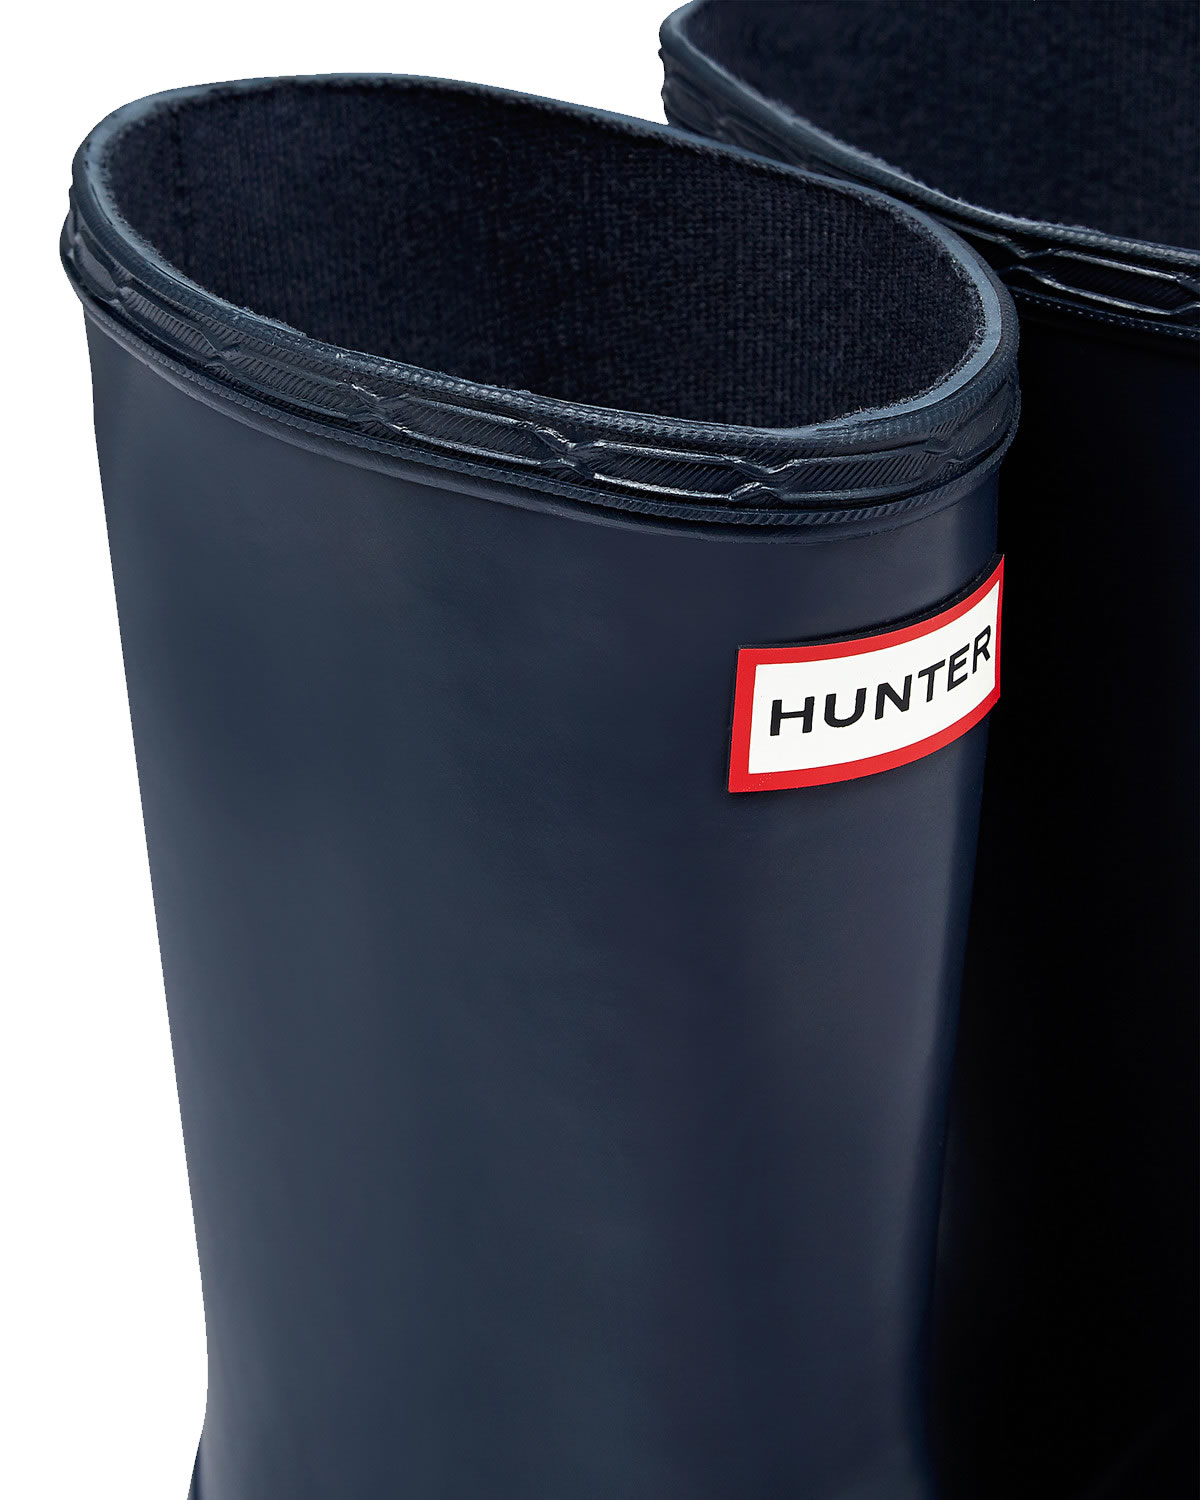 Extra image of Kids First Hunter Wellies - Navy